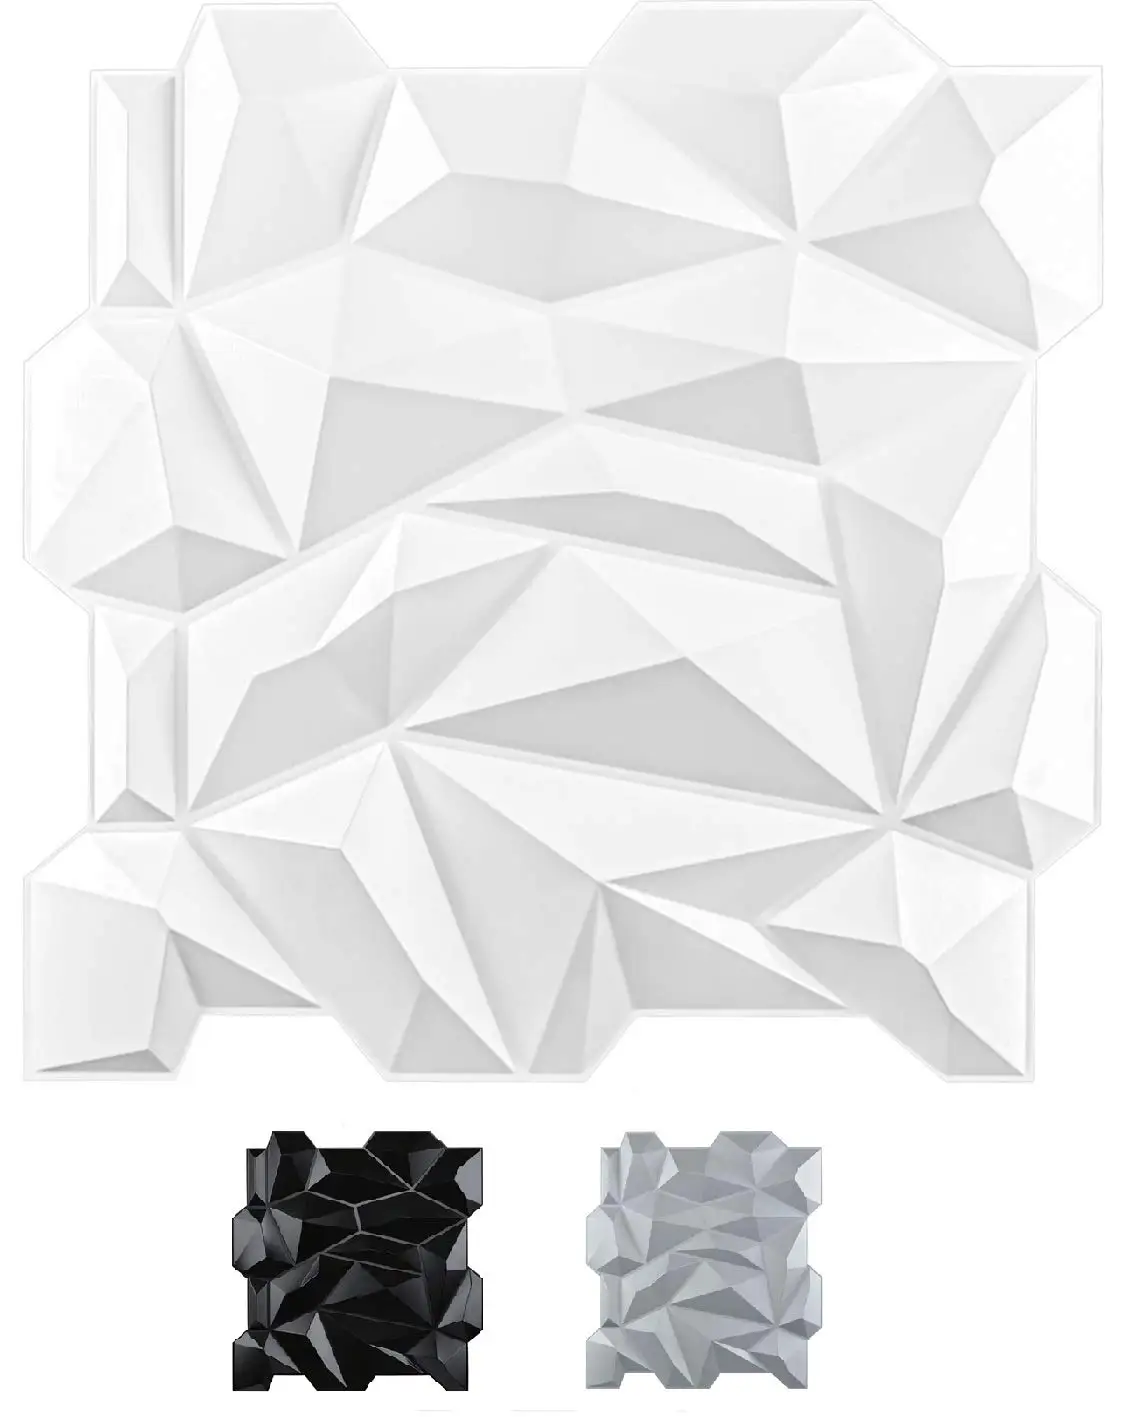 50x50cm Plastic 3D Diamond Wall Panels Jagged Matching-Matt White for Living Room Bedroom TV Background Ceiling Pack of 12 Tiles jagged alliance crossfire